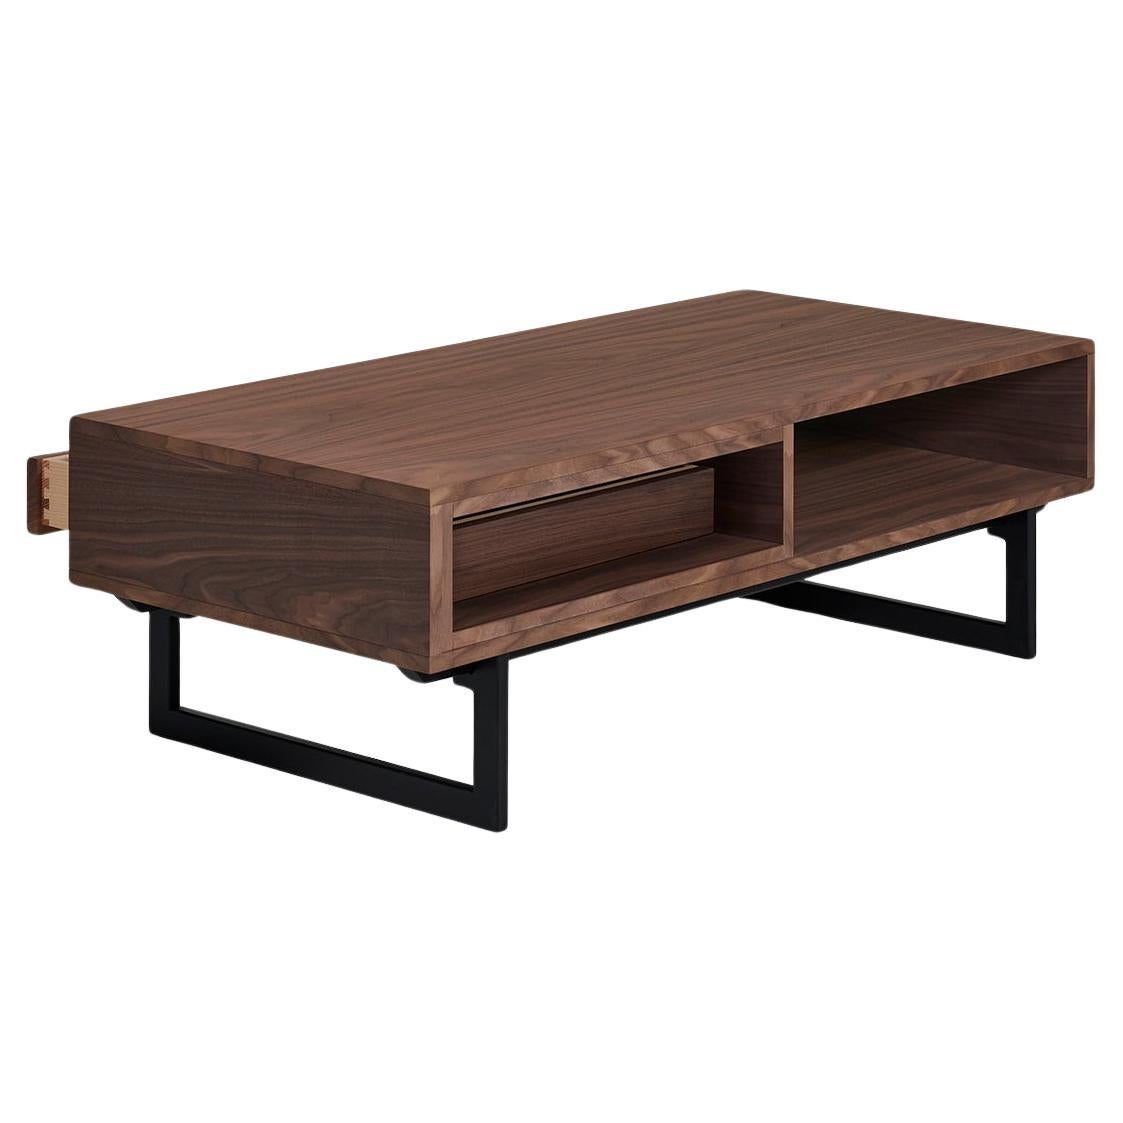 French 1-drawer coffee table in walnut & black iron feet, design by Christophe Lecomte For Sale